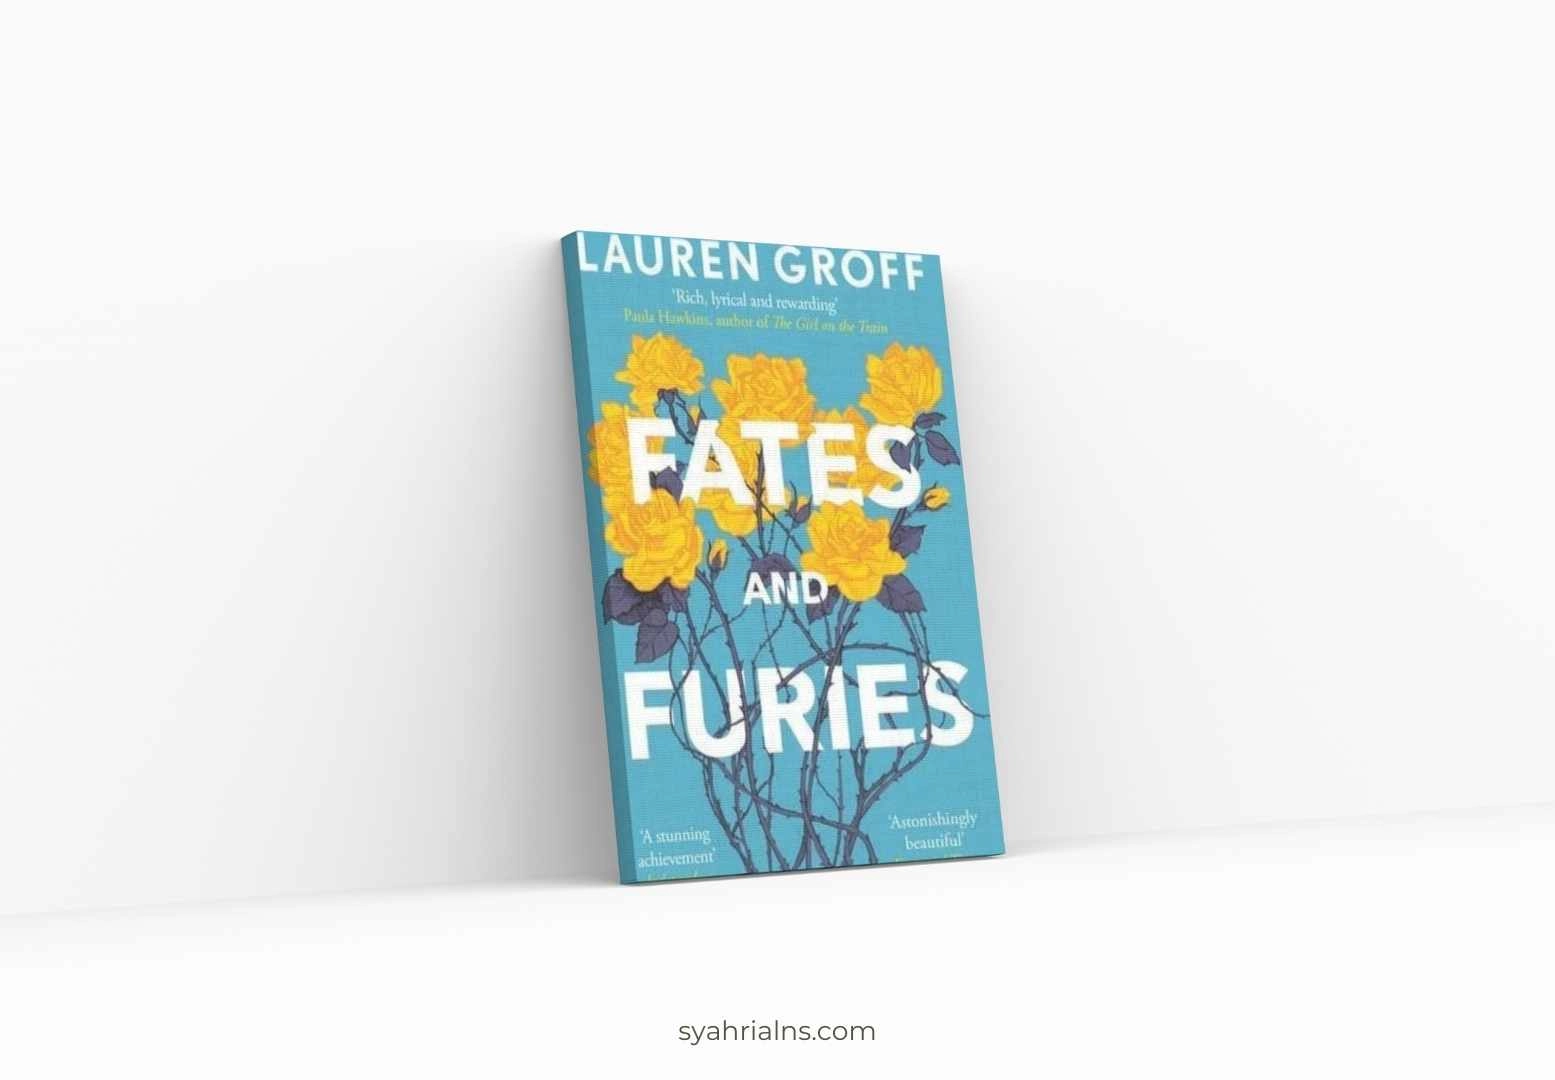 Books Like A Little Life - Fates and Furies by Lauren Groff